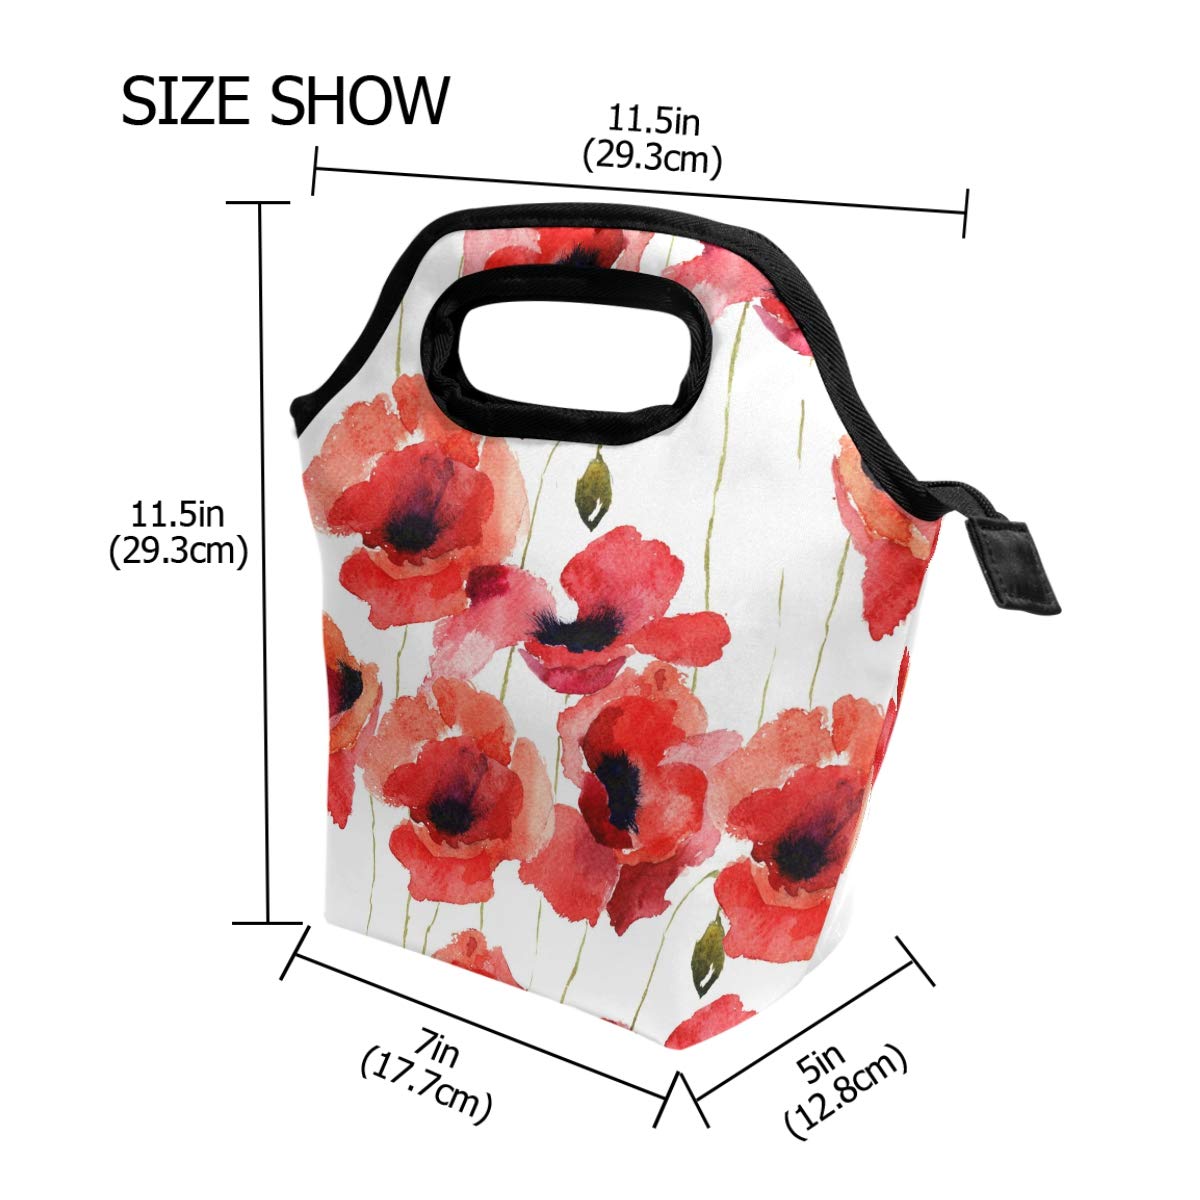 Naanle Floral Flower Insulated Zipper Lunch Bag Cooler Tote Bag for Adult Teens Kids Girls Boys Men Women, Poppy Lunch Boxes Lunchboxes Meal Prep Handbag for Outdoors School Office